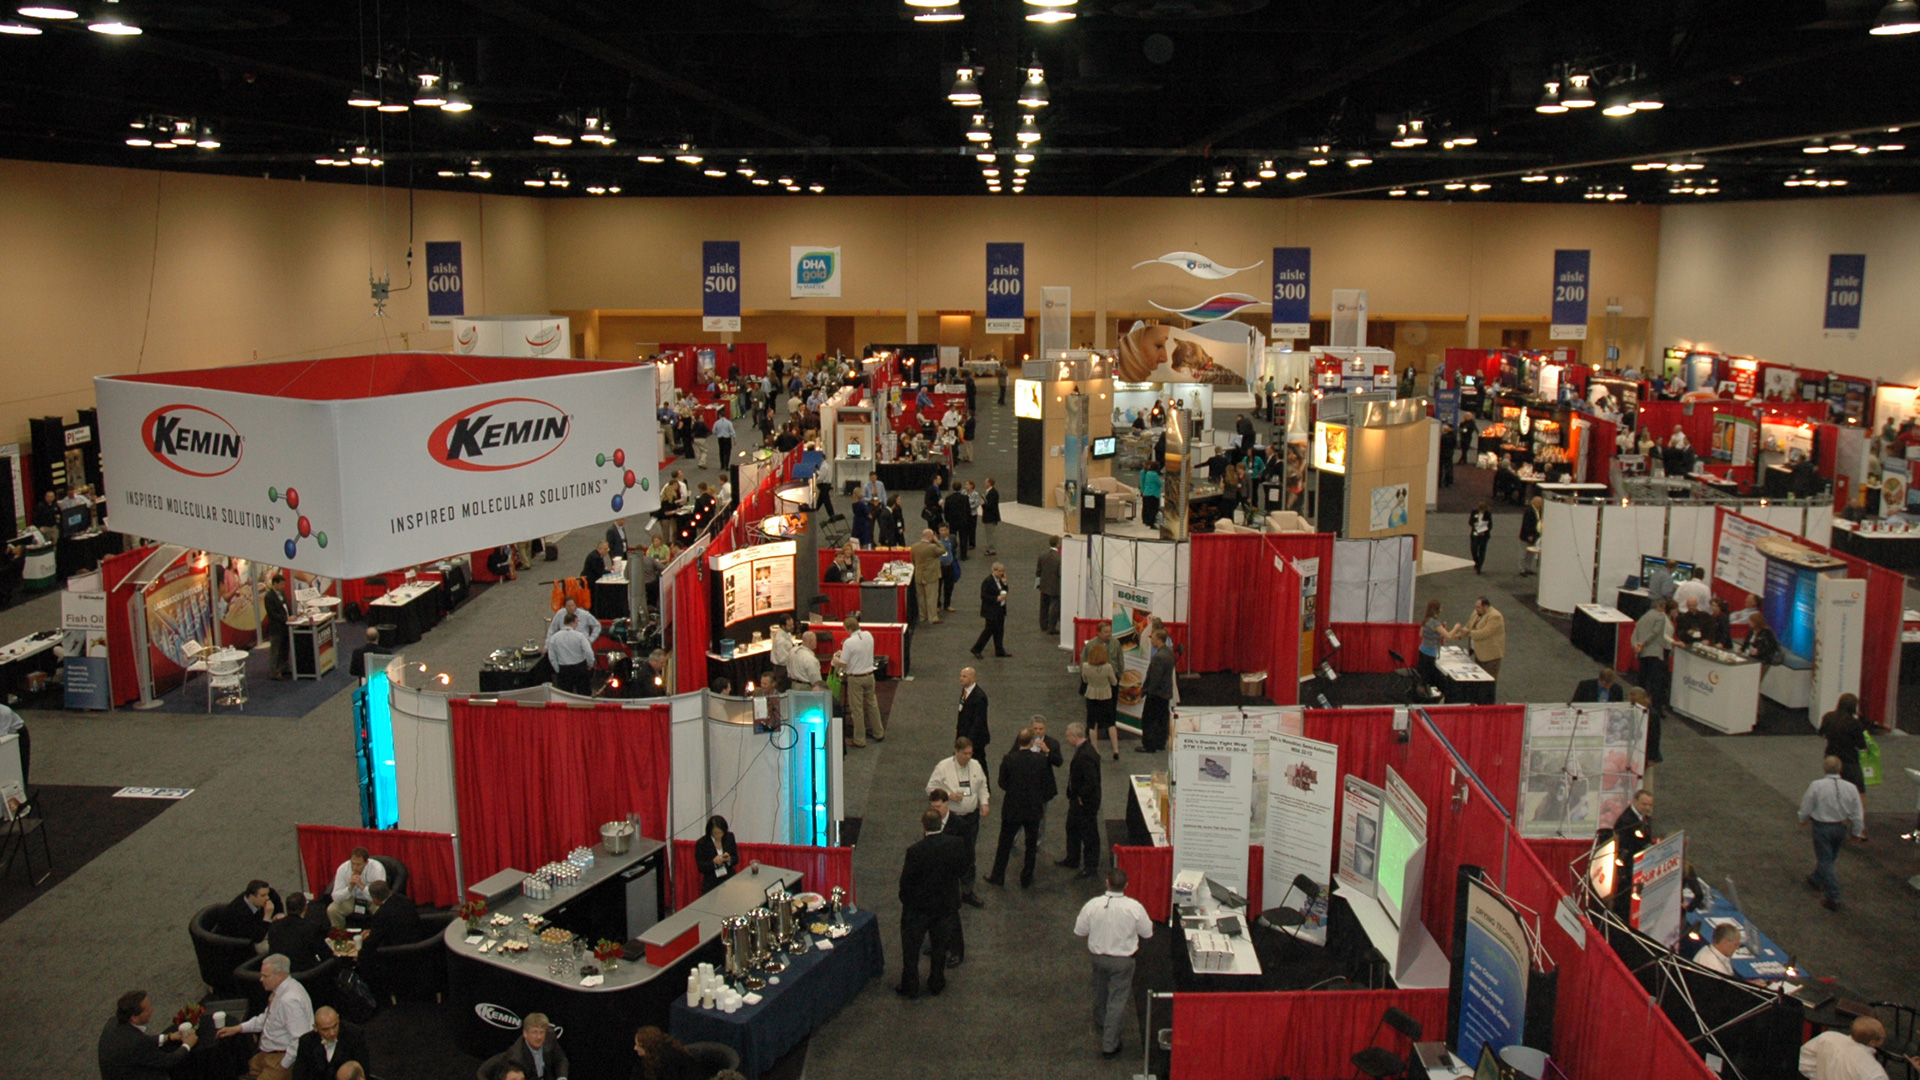 Kemin Tradeshow Convention Display Example by Viper Tradeshow Services